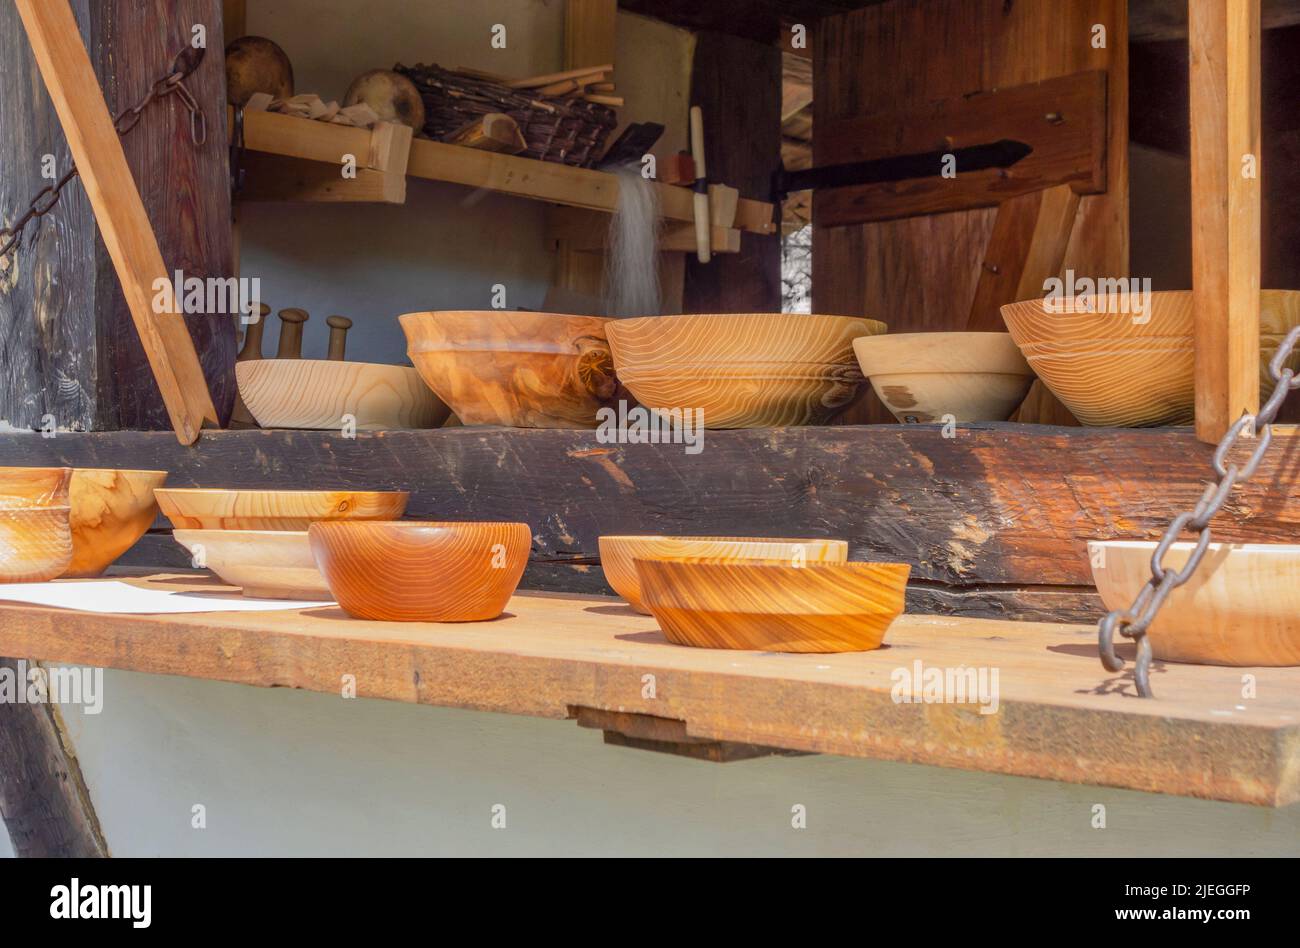 Medieval scenery showing some wooden dinnerware Stock Photo